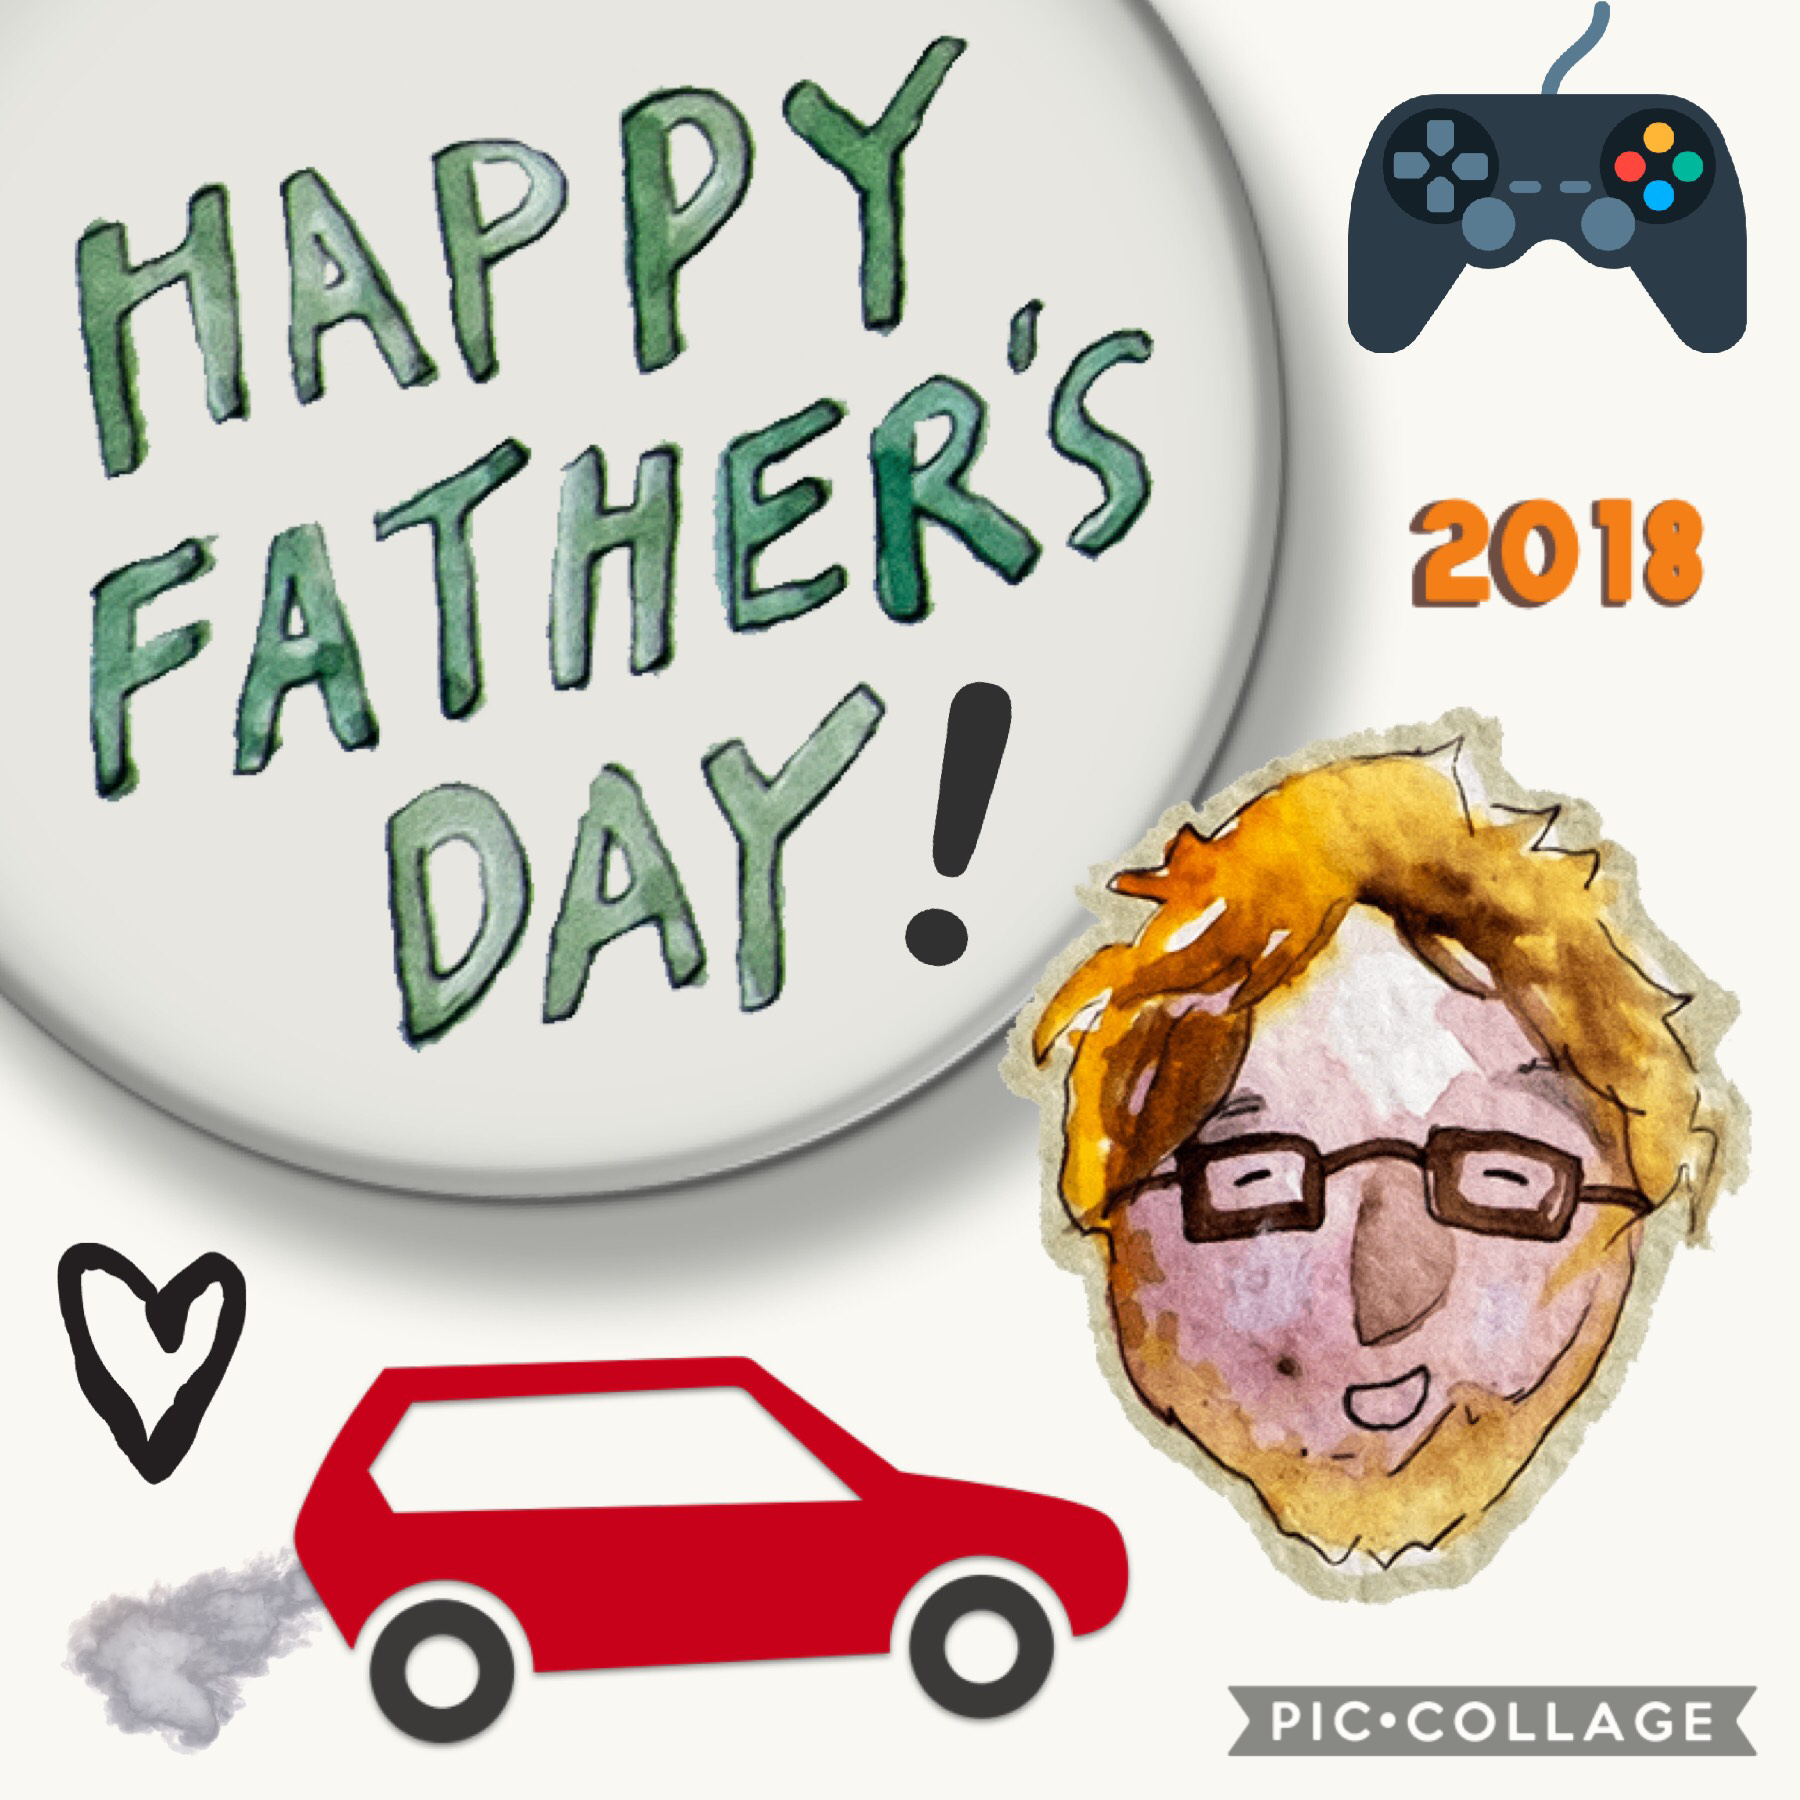 Happy Father’s Day! 😎 Personally idc for it, cuz we don’t have much of a relationship, and some other stuff, but this is an exception. 🙃 Comment emojis describing your dad/what he likes. 📺 🧟‍♂️ 🇺🇸 👓 🏈 🥩 🎮 🔫 🏀 🏋🏻‍♂️ 🧢 🦌 🚗 👟 🎣 💻 Check remixes. 👇🏻